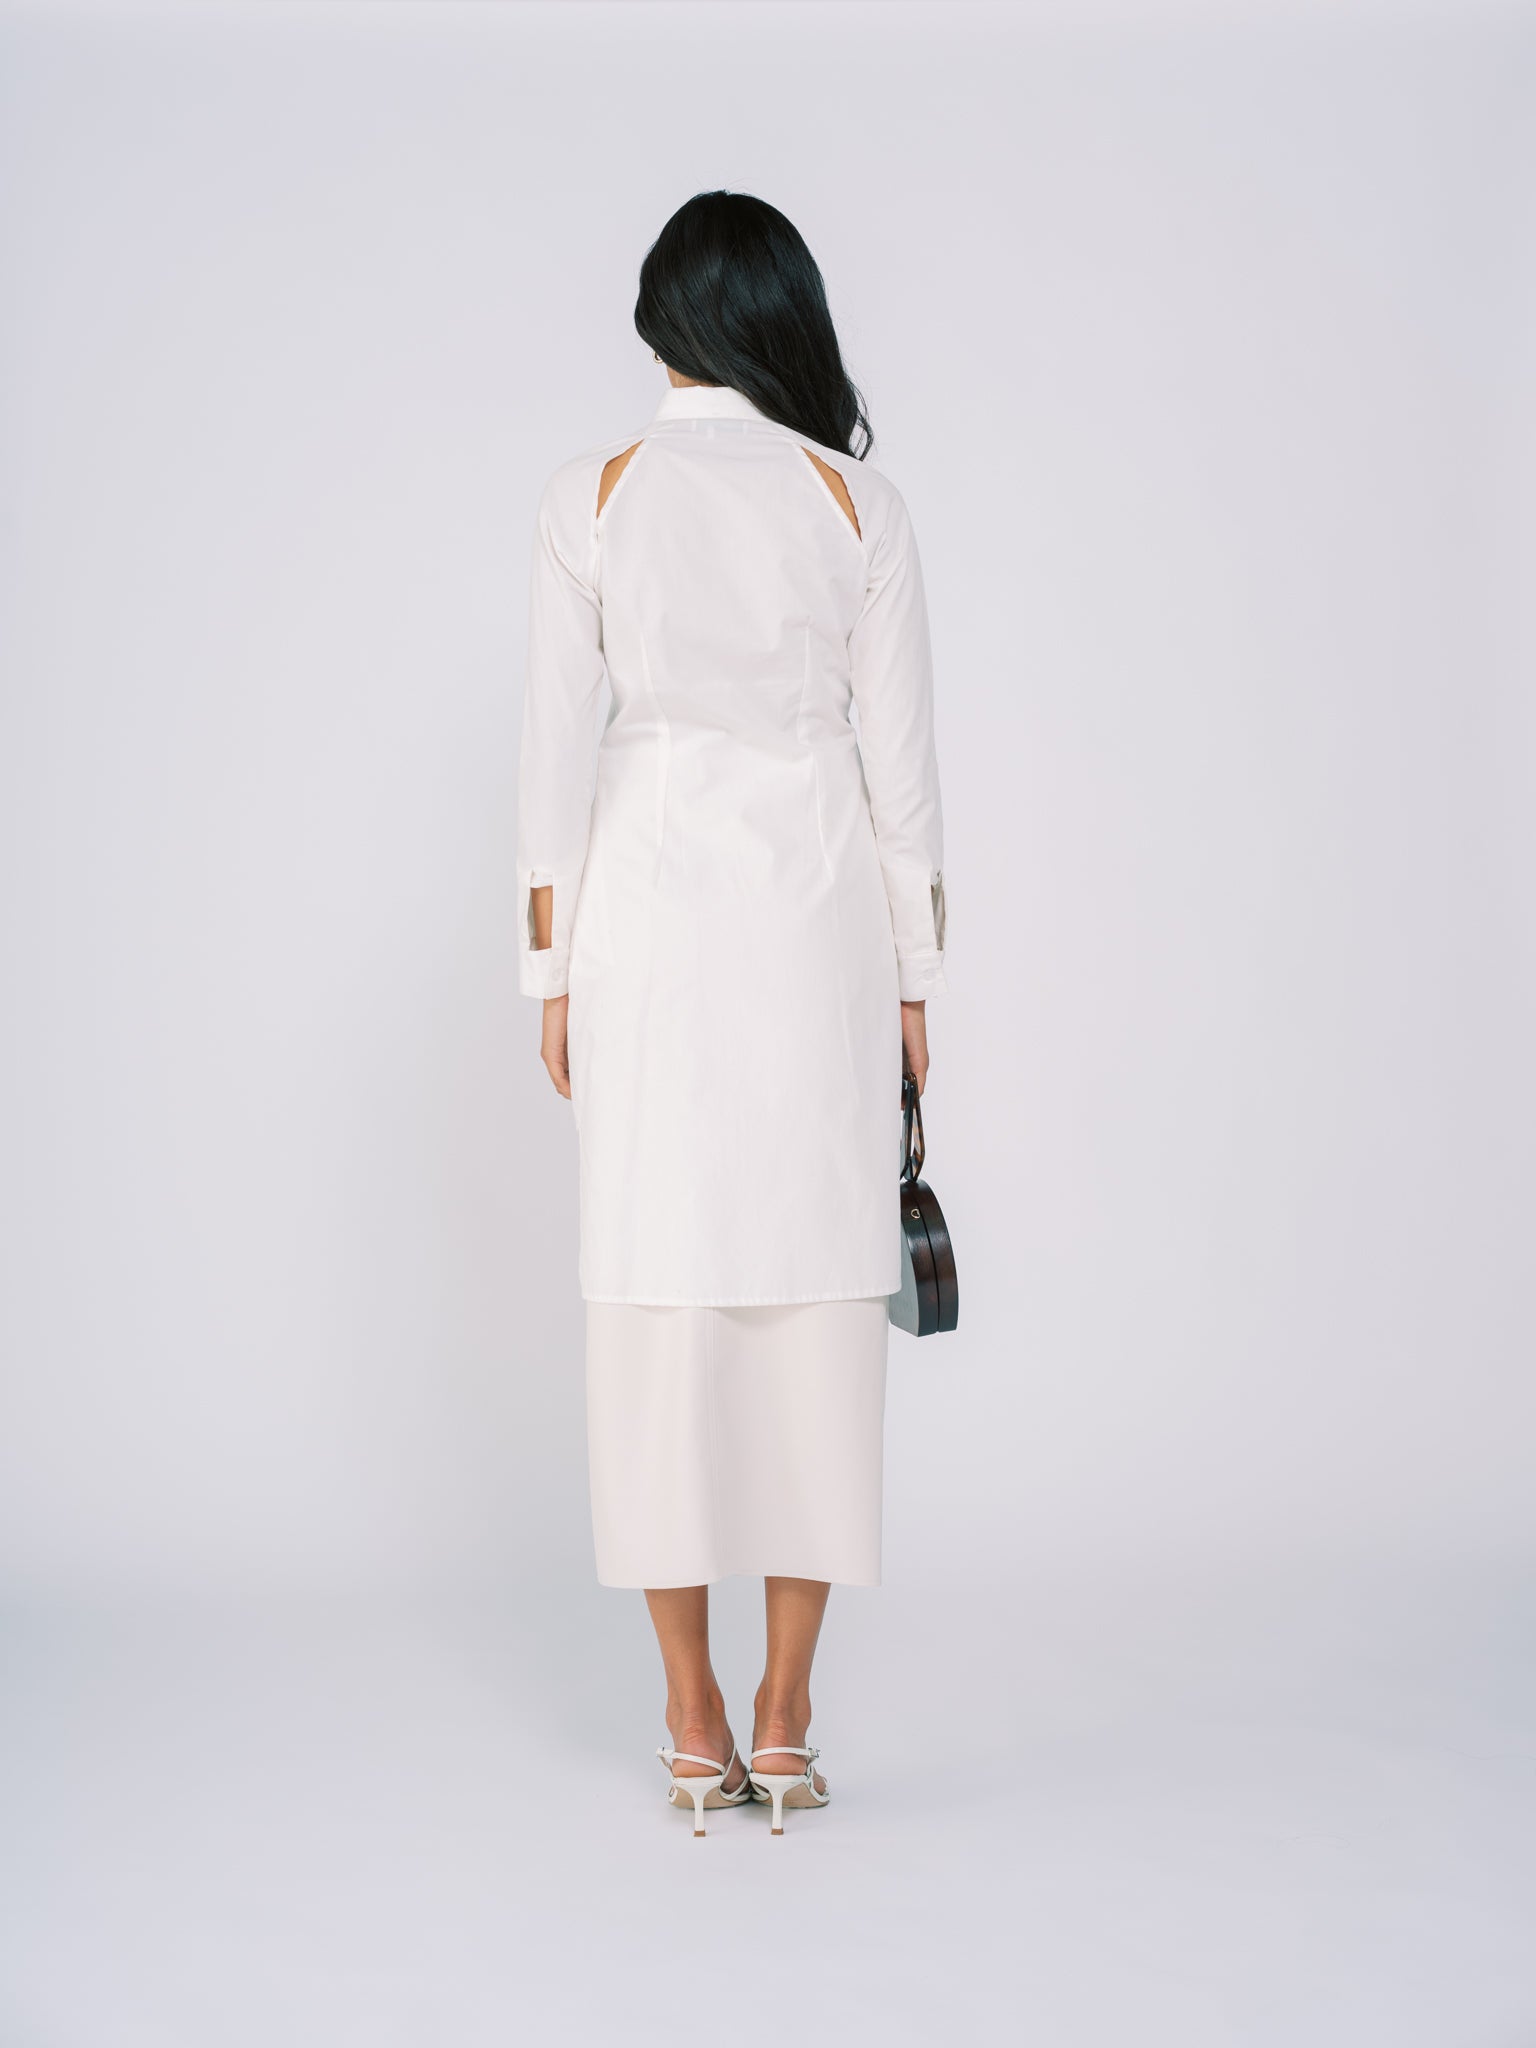 Shirt Dress with Cut Outs in White